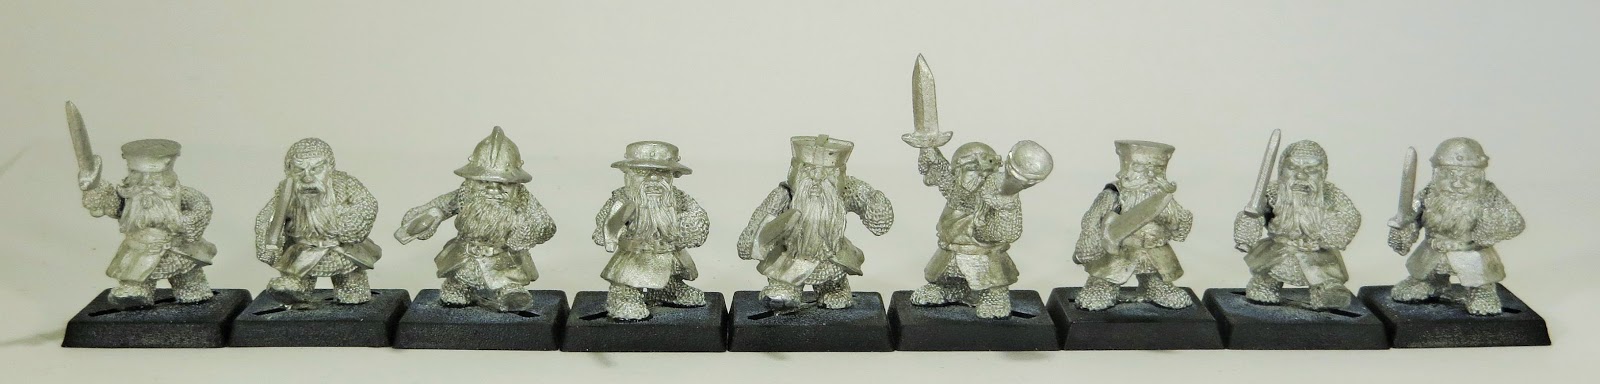 Dwarf Champions And Heroes x3 28mm Unpainted Metal Wargames 